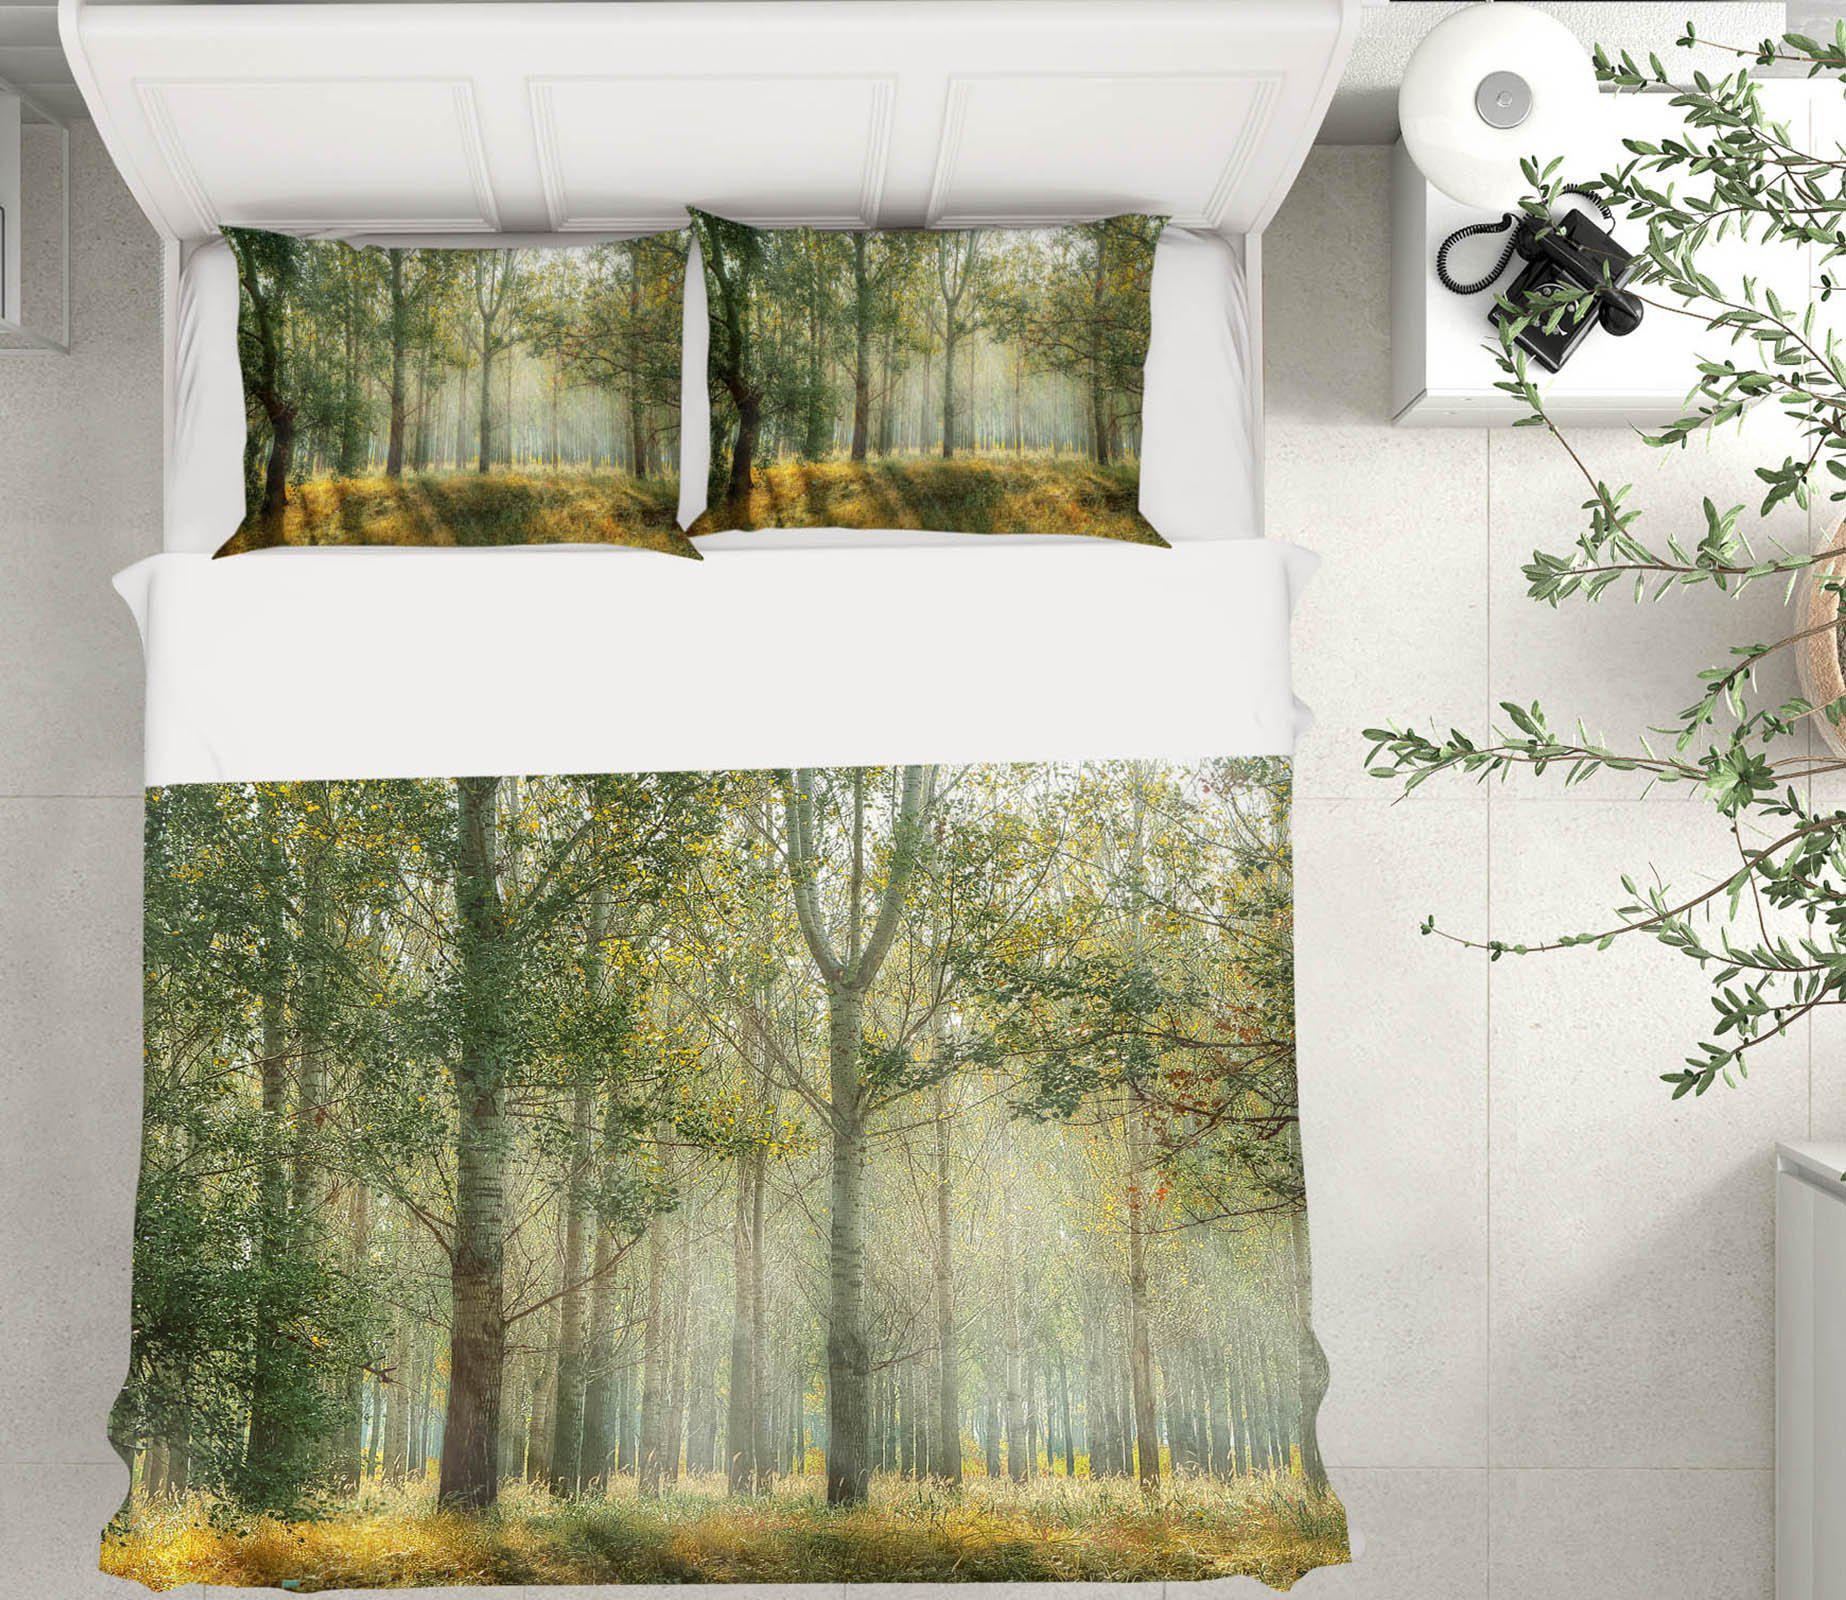 3D Bed Pillowcases Quilt Forest 19172 Quilt Cover Set Bedding Set Pillowcases 3D Bed Pillowcases Quilt Duvet cover